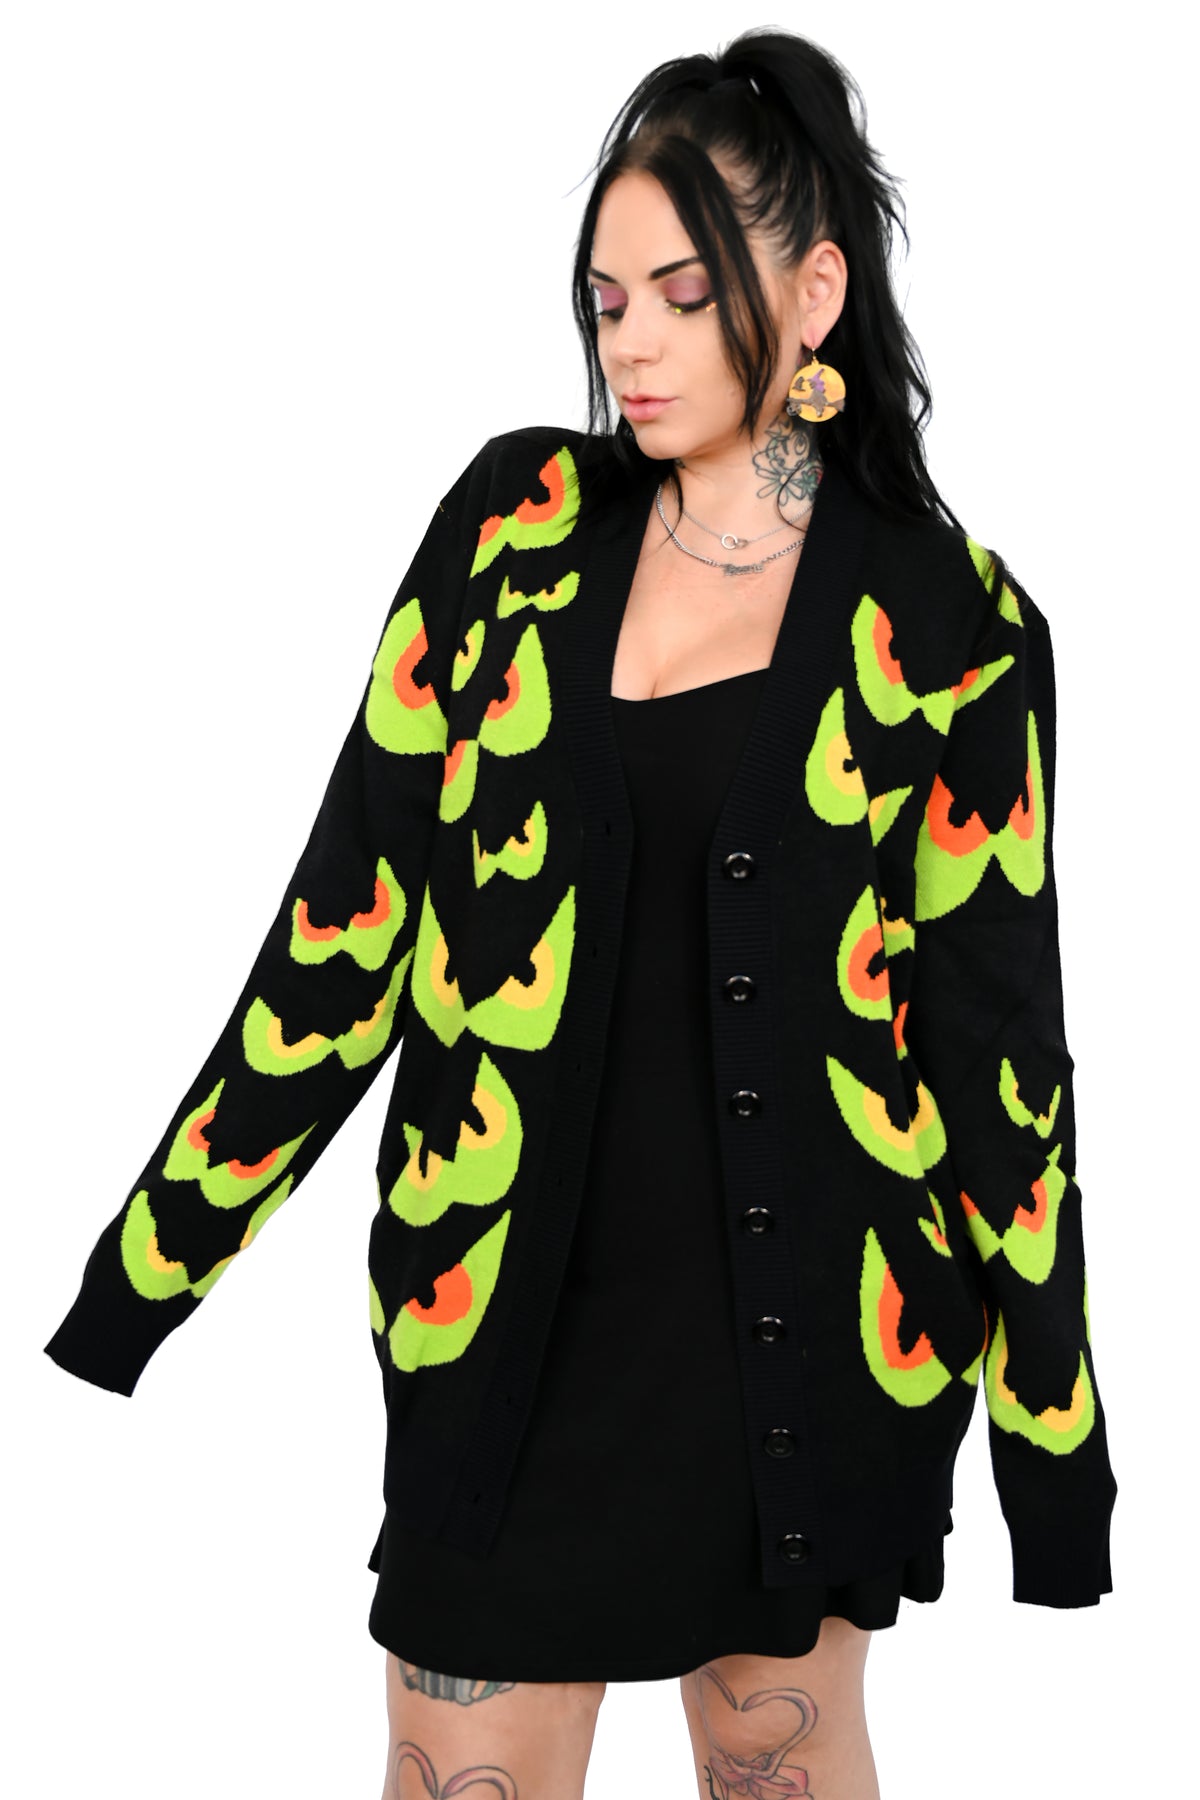 black cardigan with green/yellow and green/orange spooky eyes all over